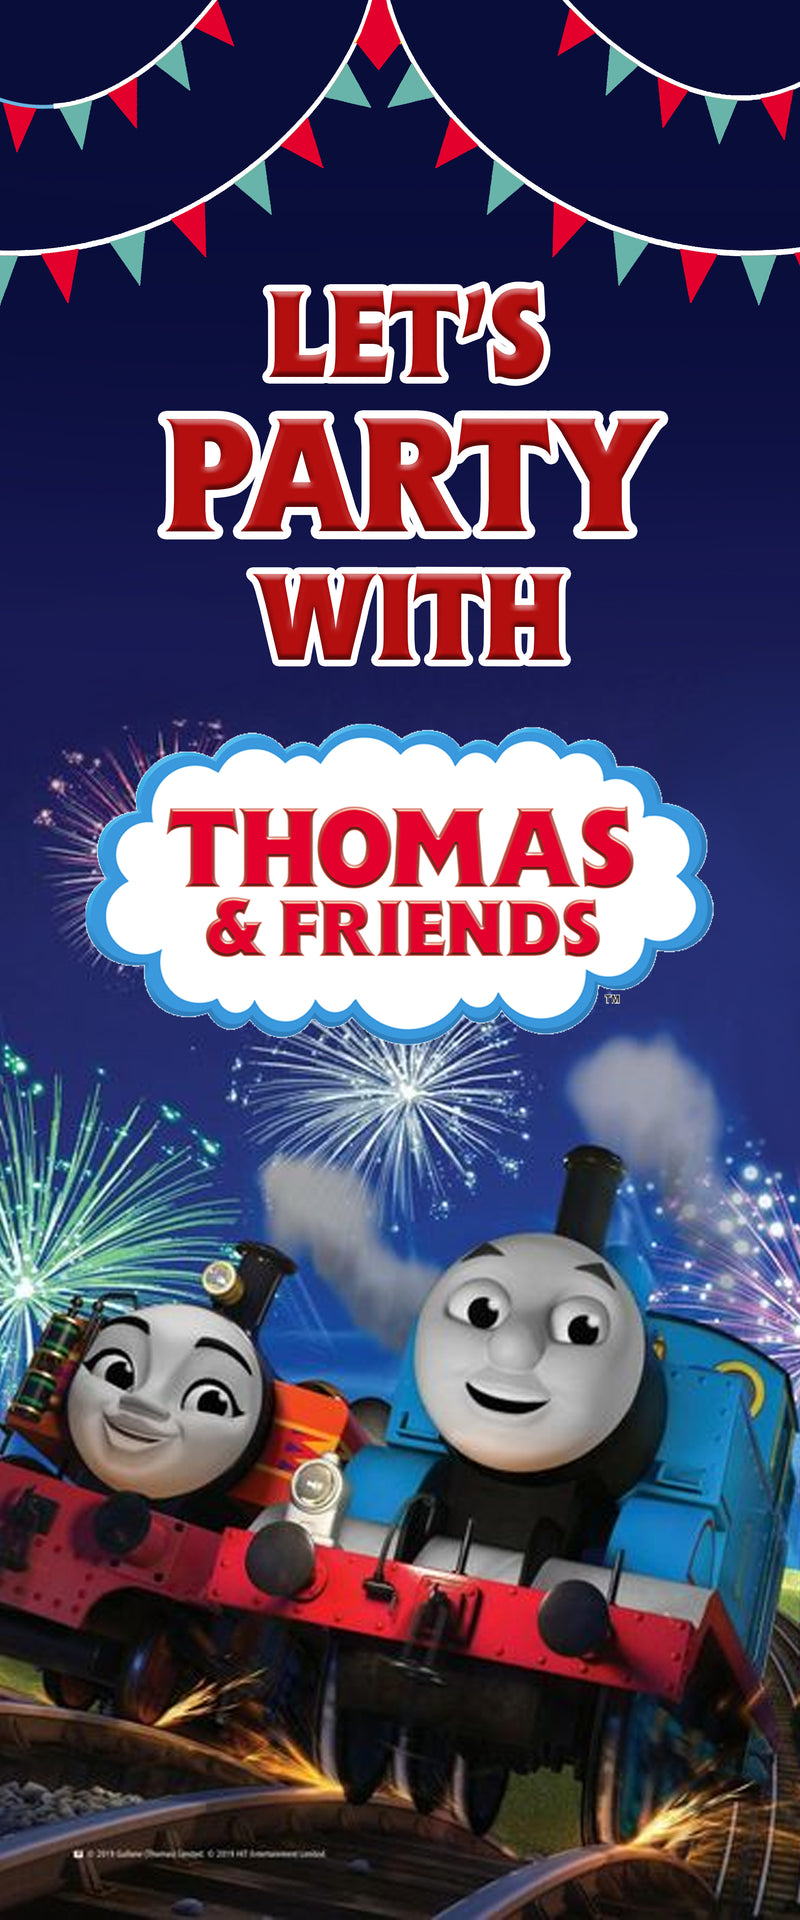 Thomas & Friends Welcome Banner Roll up Standee (with stand)